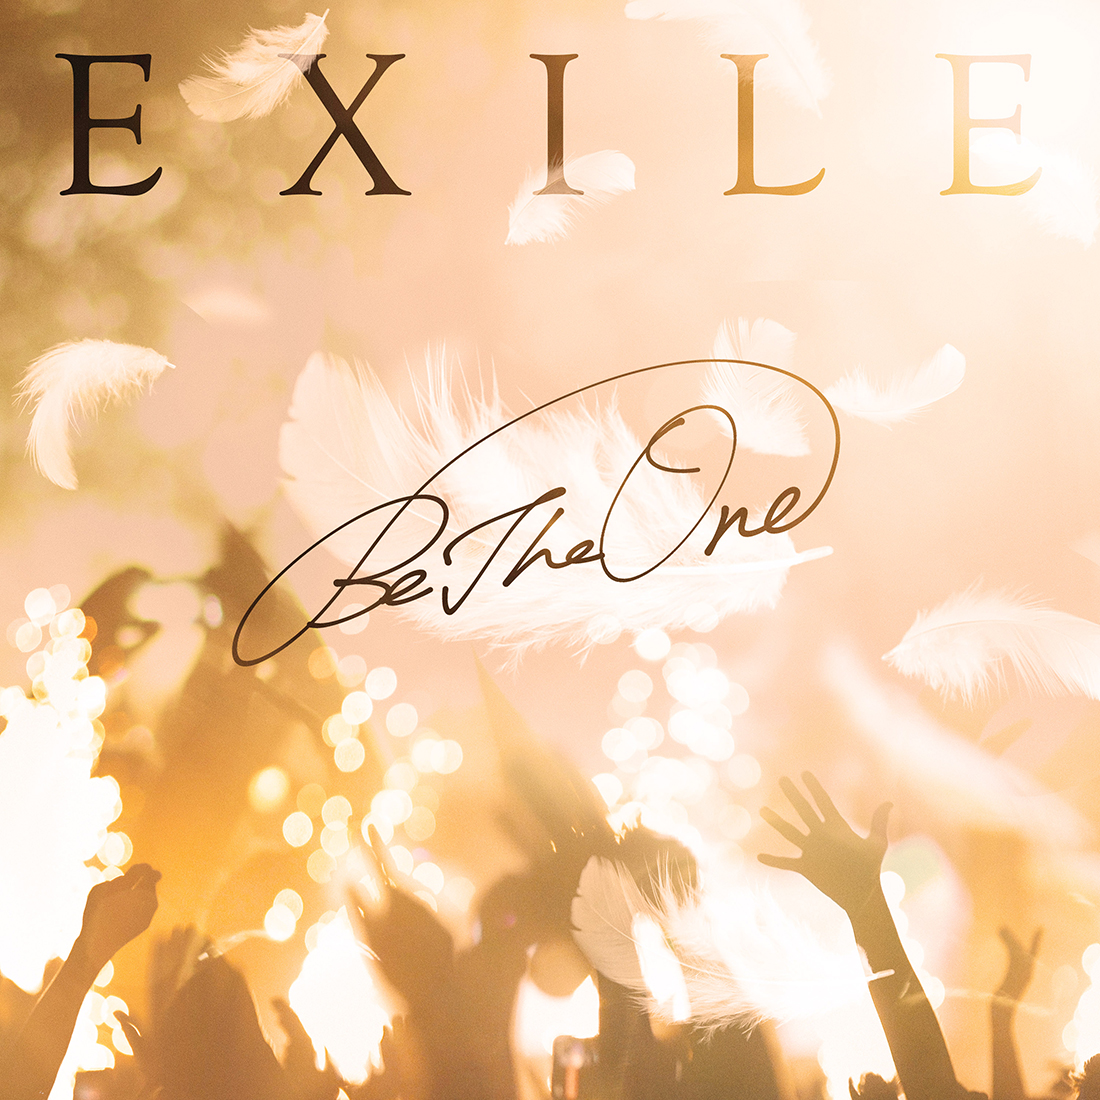 EXILE、新曲「BE THE ONE」を大阪城ホール公演でサプライズ初披露＆配信リリースも決定 - 画像一覧（1/1）